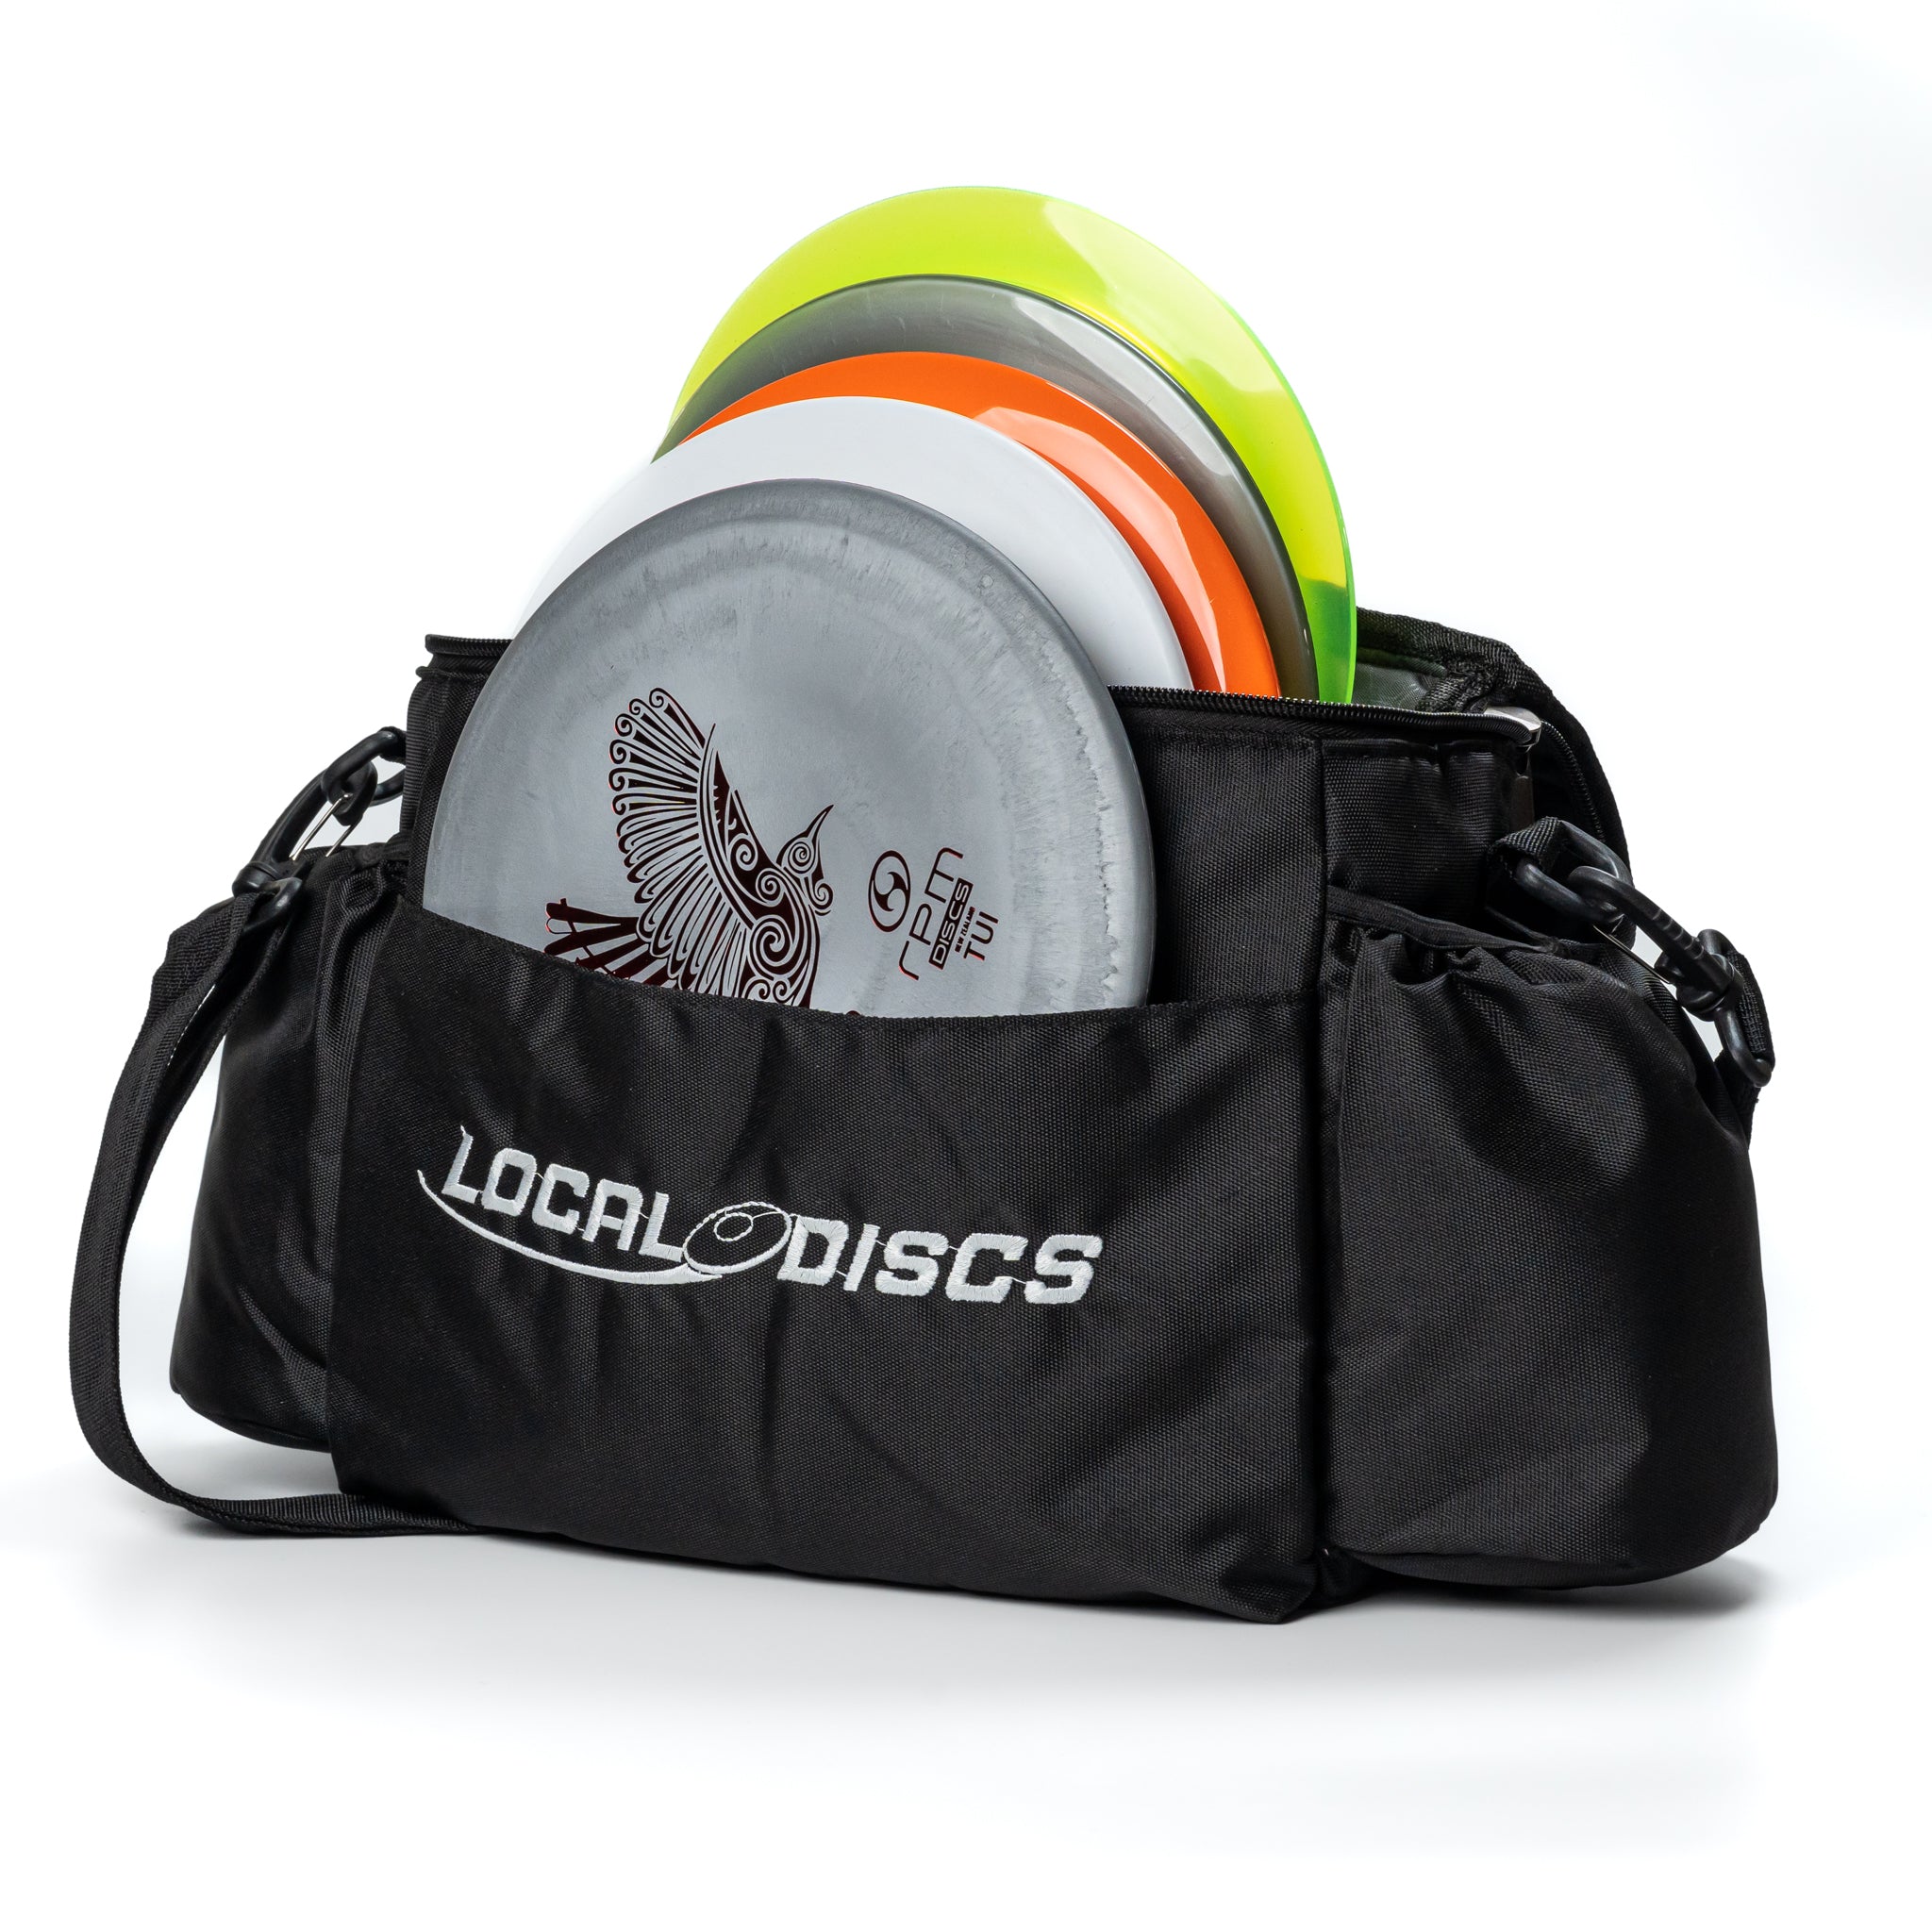 Local Discs Pro Starter Disc Golf Set with black bag and Tui putter